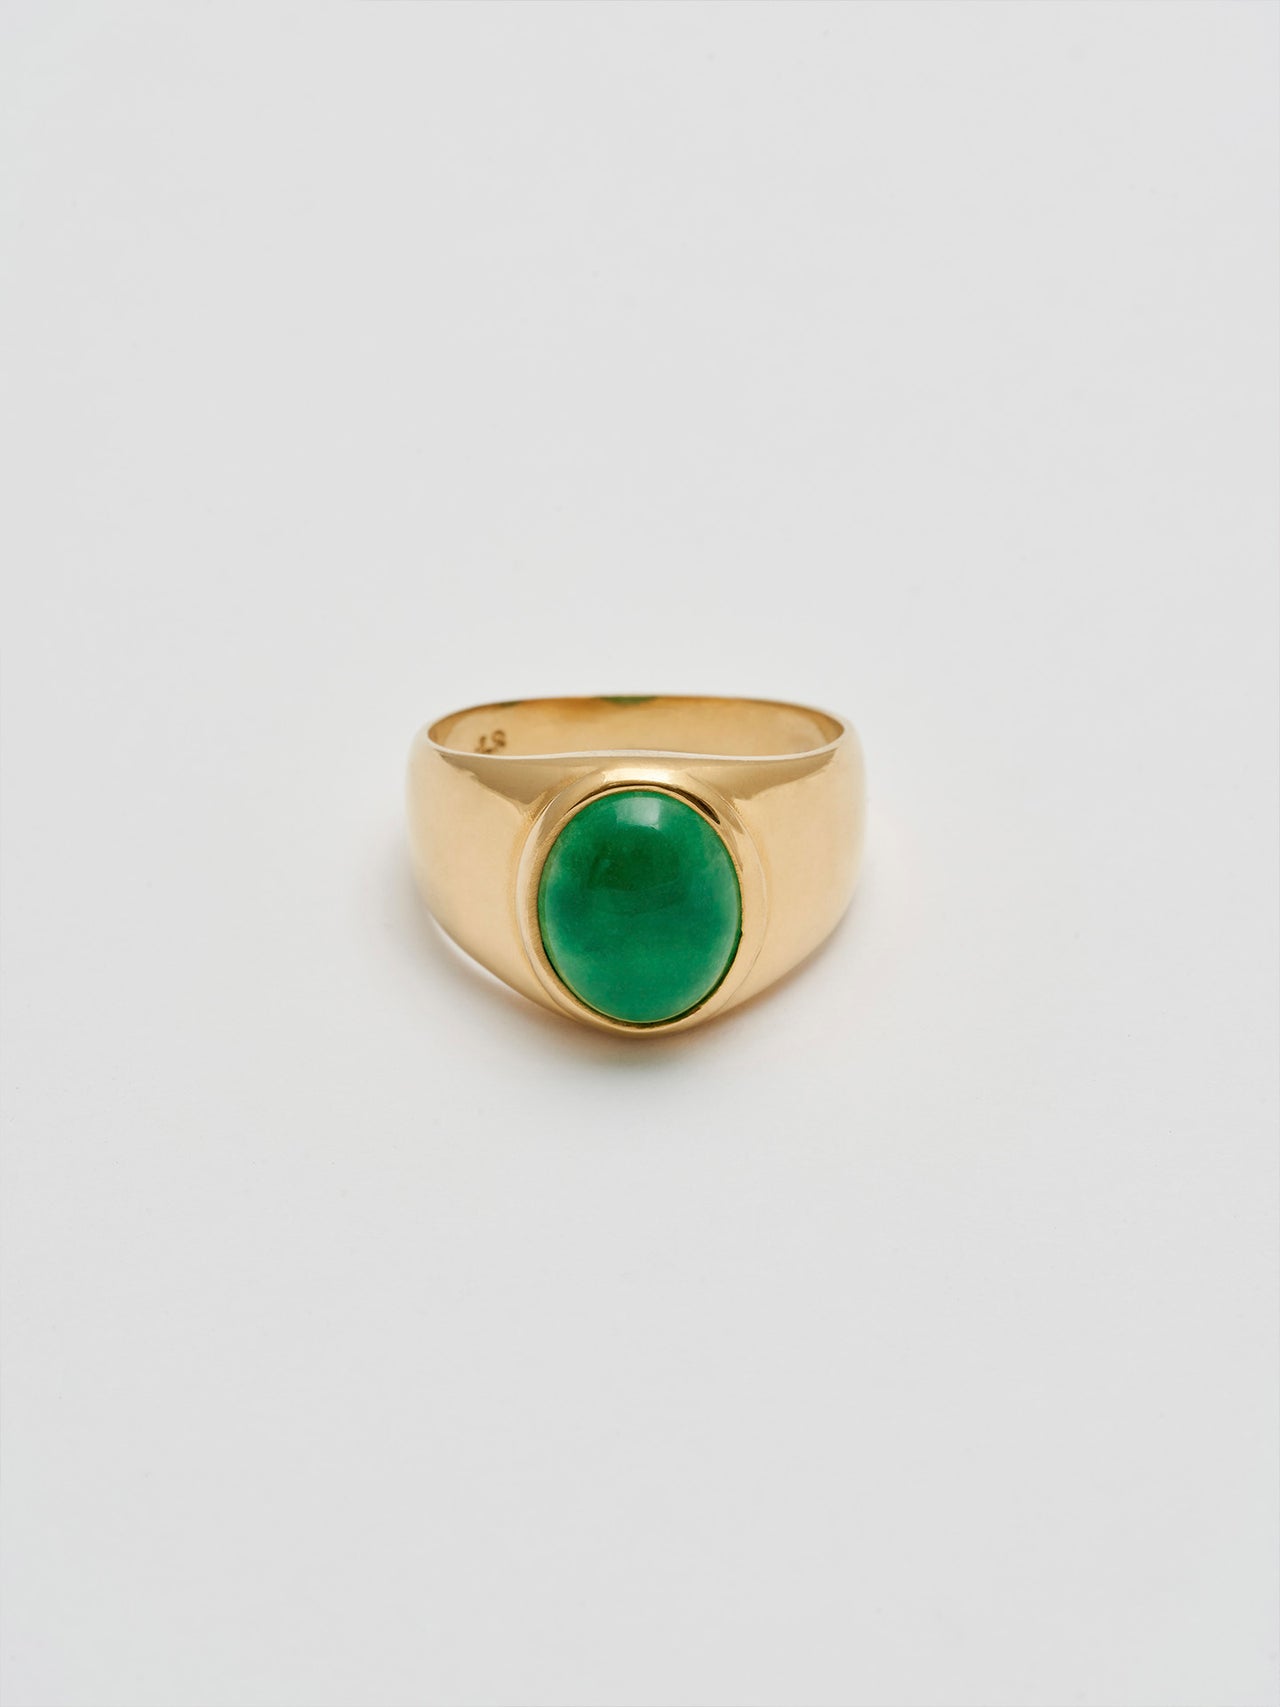 Product shot of the front of Classico Jade signet ring (Shiny vermeil tapered signet ring band with Oval Green Jade stone in center) with white Background.